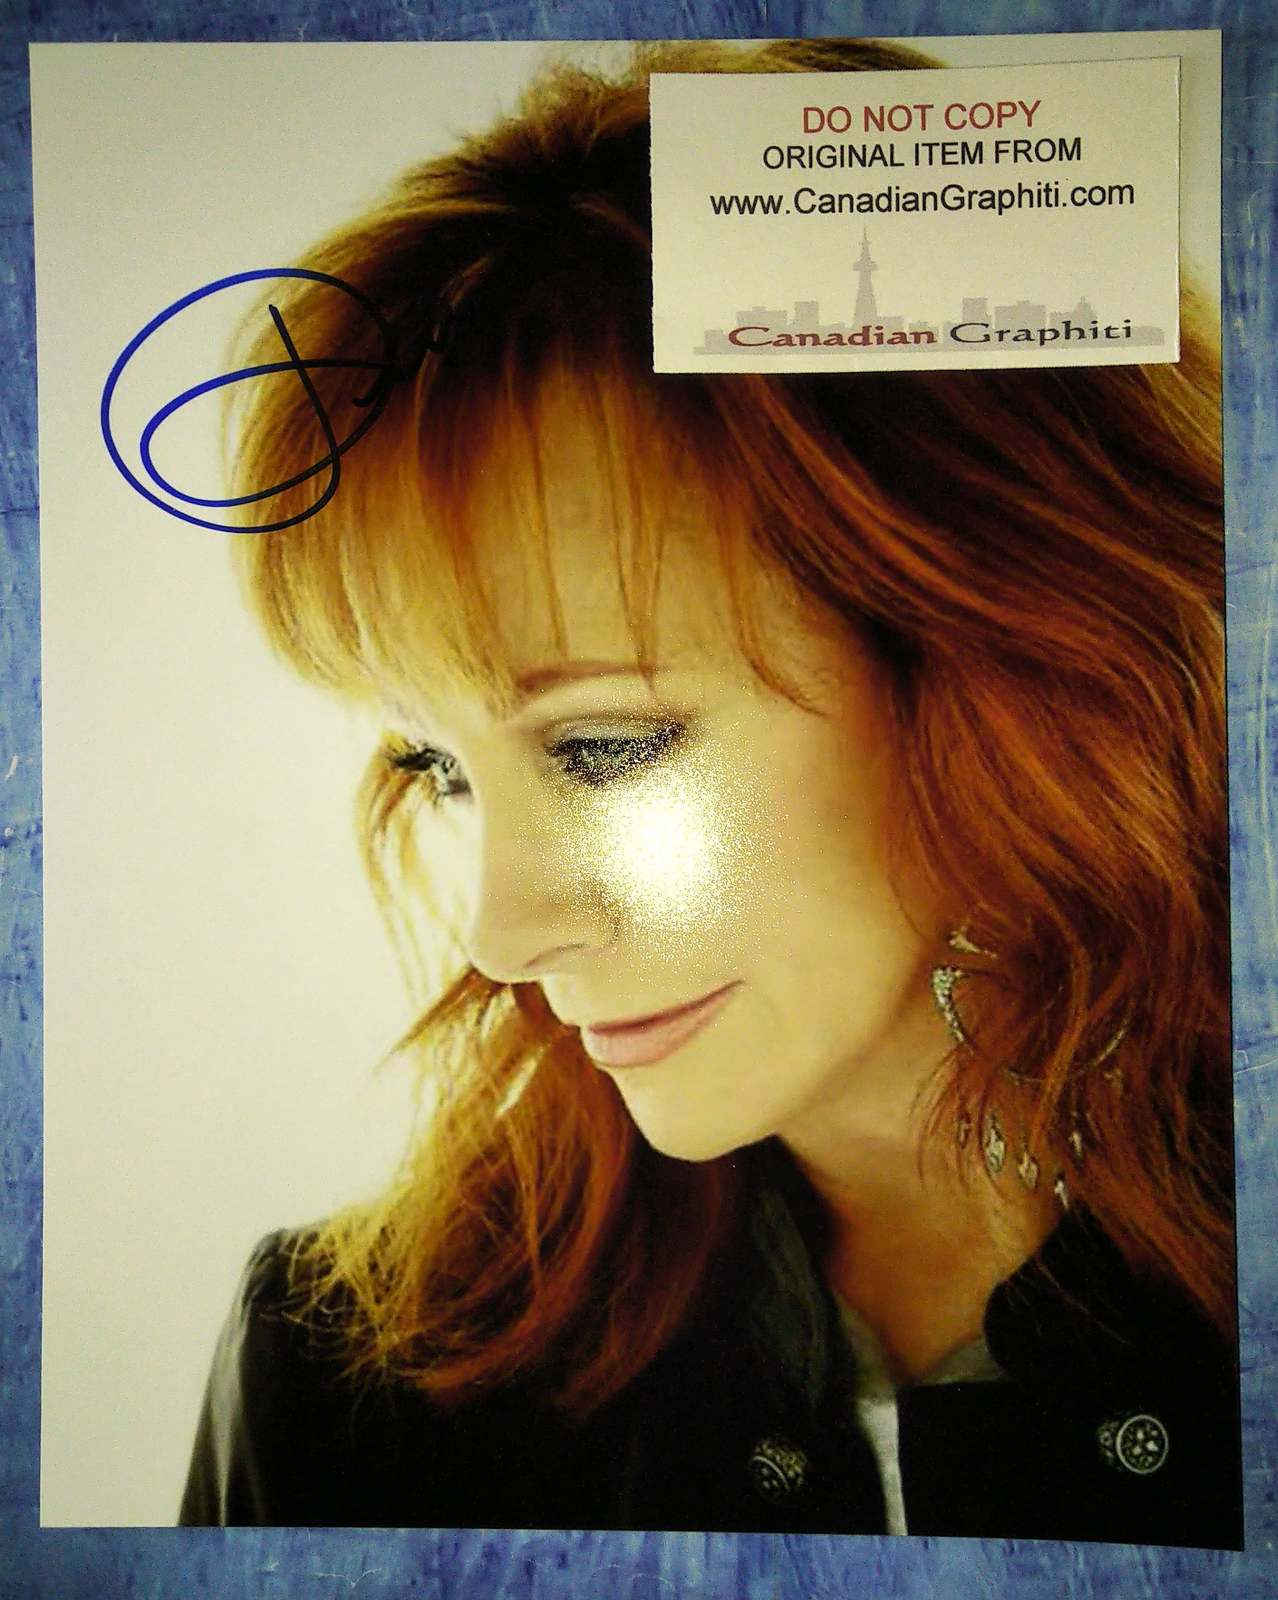 Primary image for Reba McEntire Hand Signed Autograph 8x10 Photo